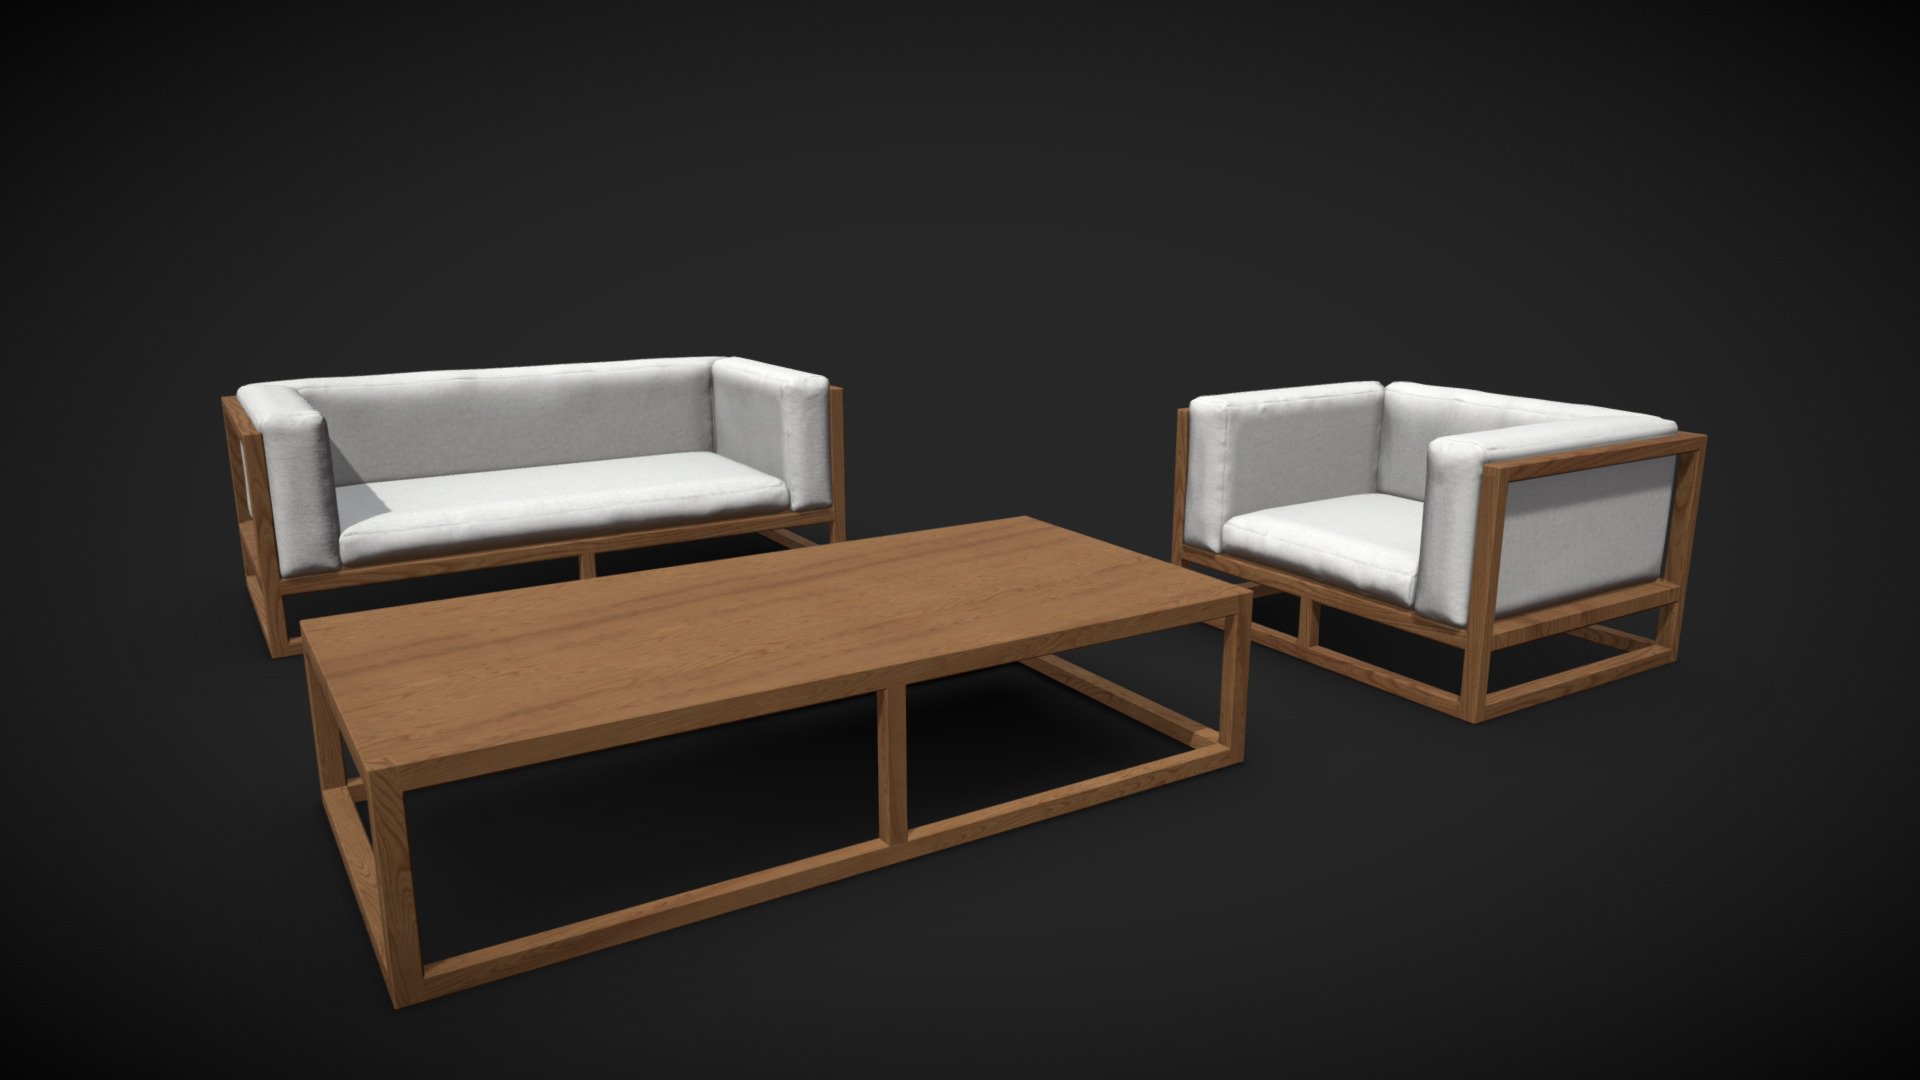 VR Ready garden set with a couch, sofa and table made of wood 3d model